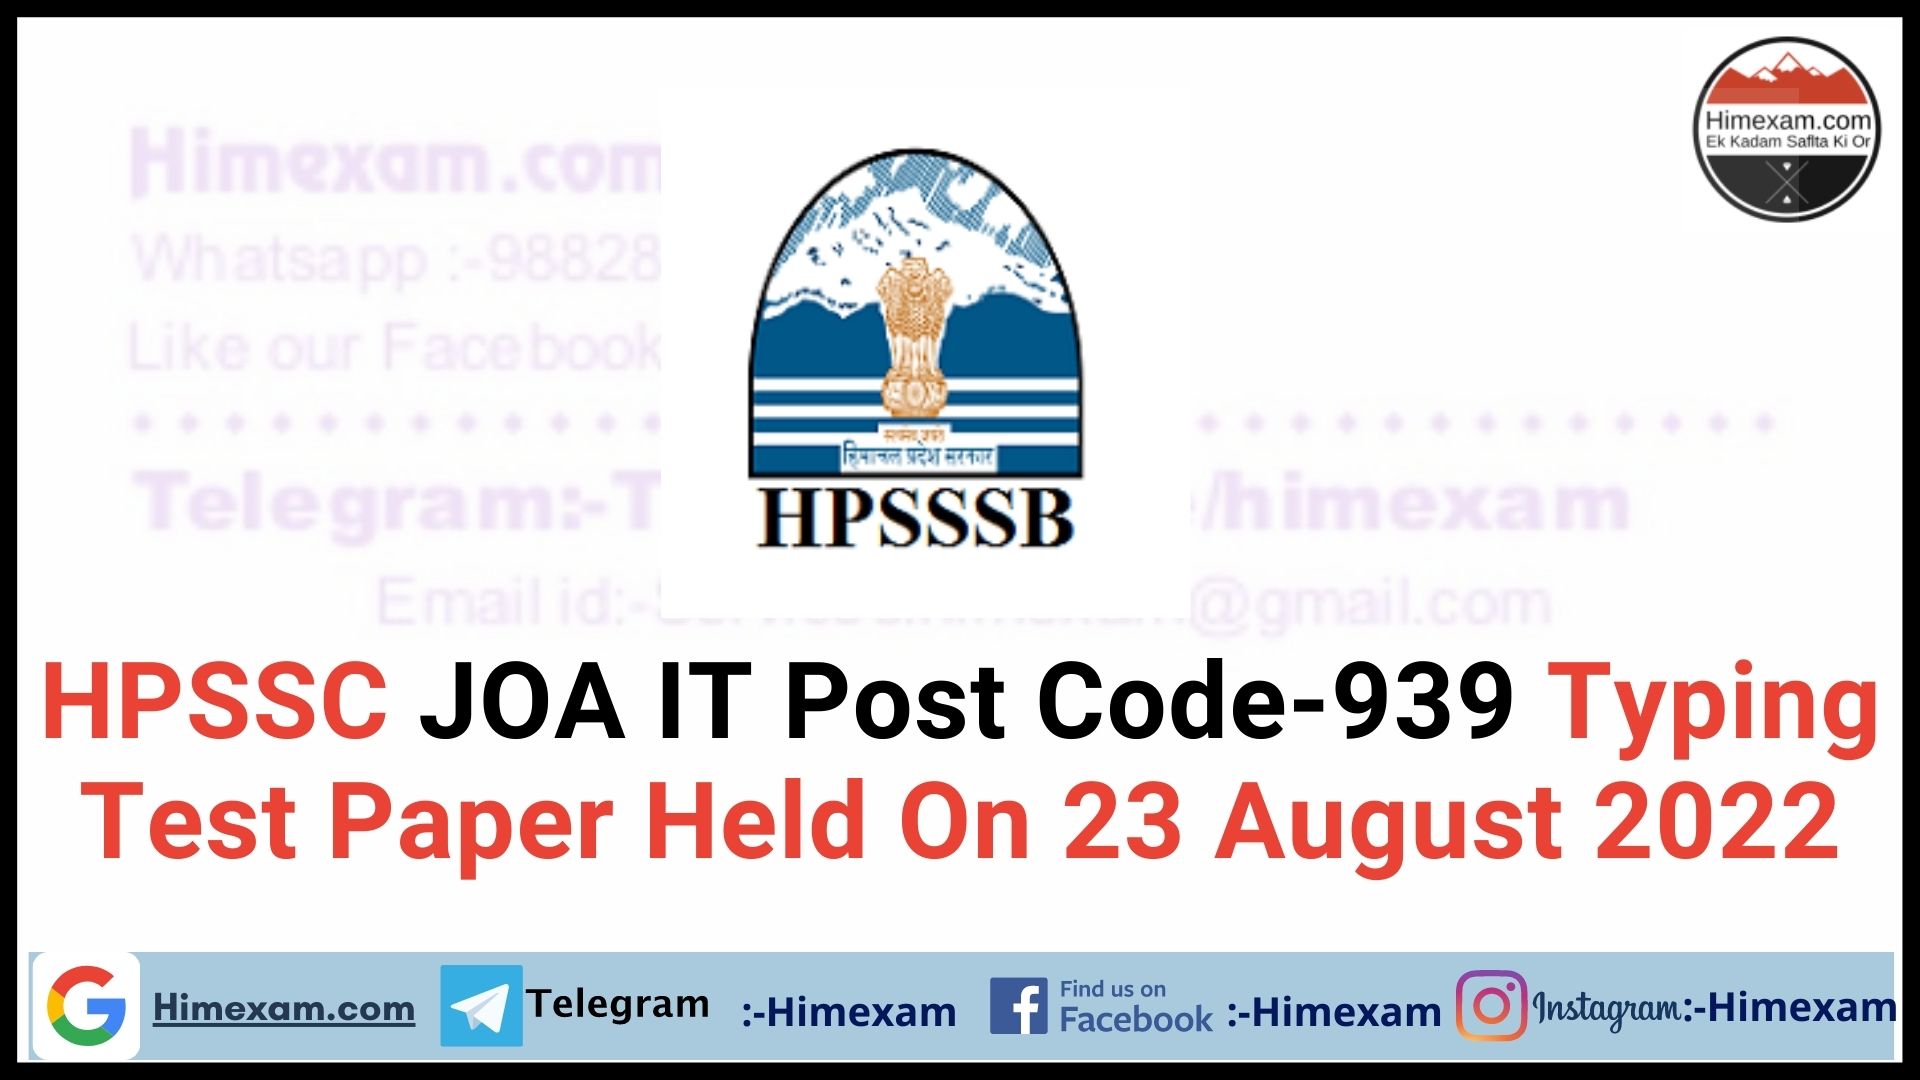 HPSSC JOA IT Post Code-939 Typing Test Paper Held On 23 August 2022